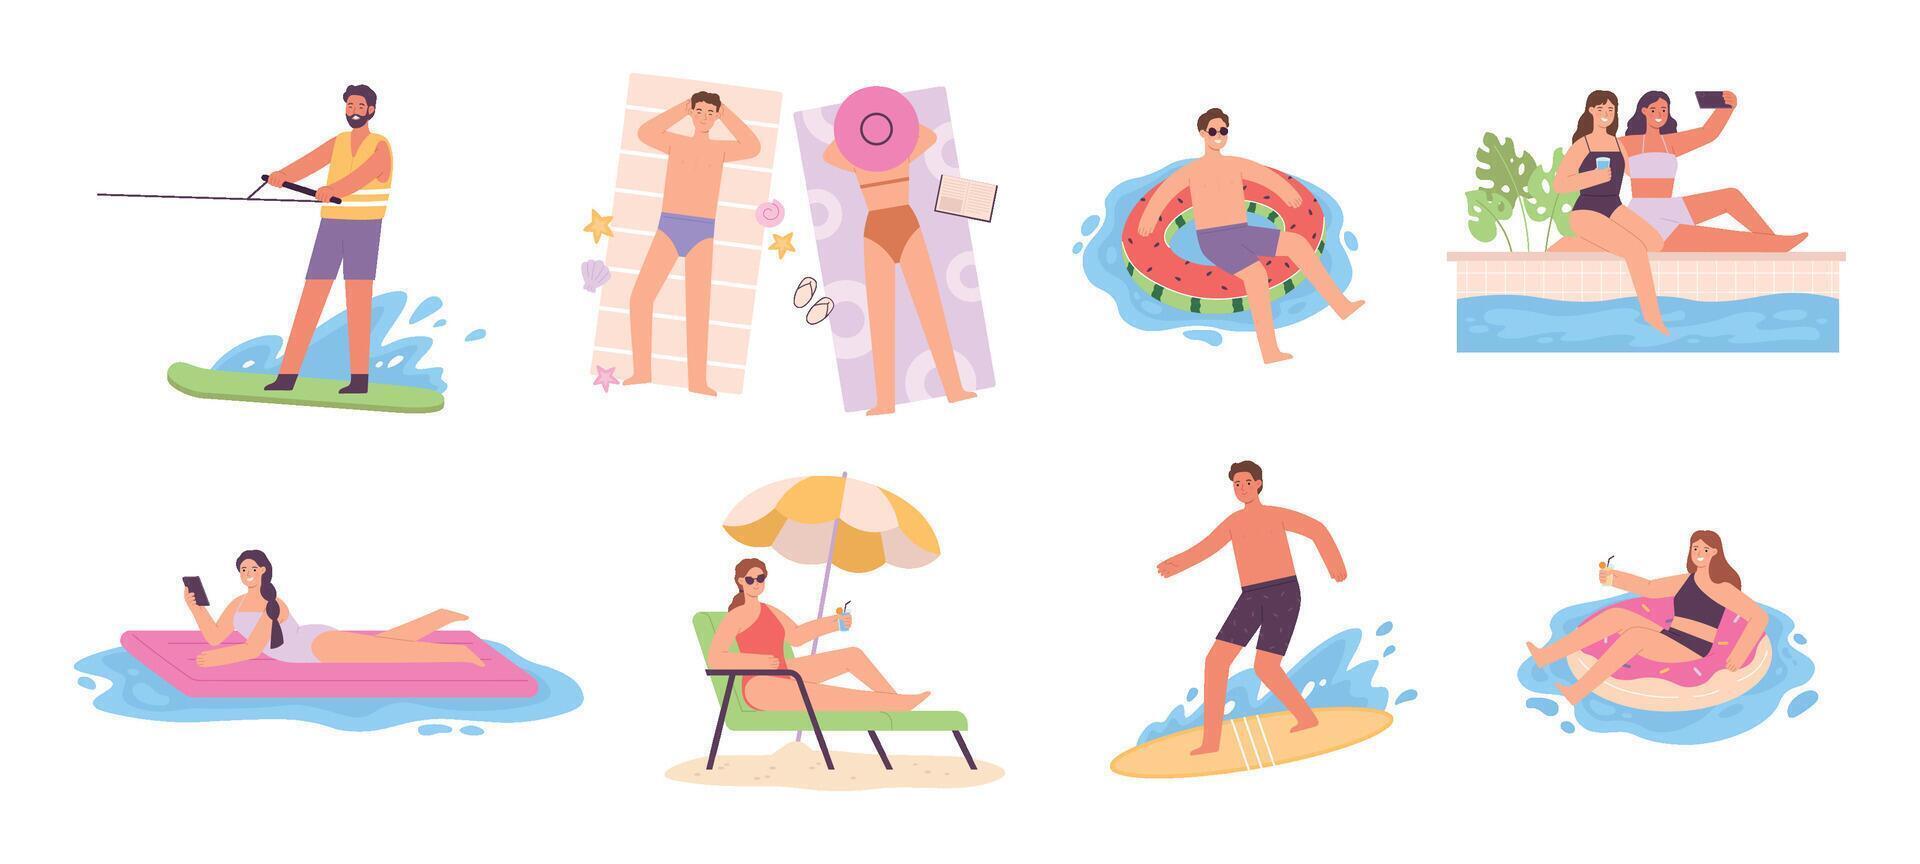 Flat characters enjoying summer, sunbathe on lounger and lay at swim rings. Women in swimming pool. Men surfer. Tourists activity vector set